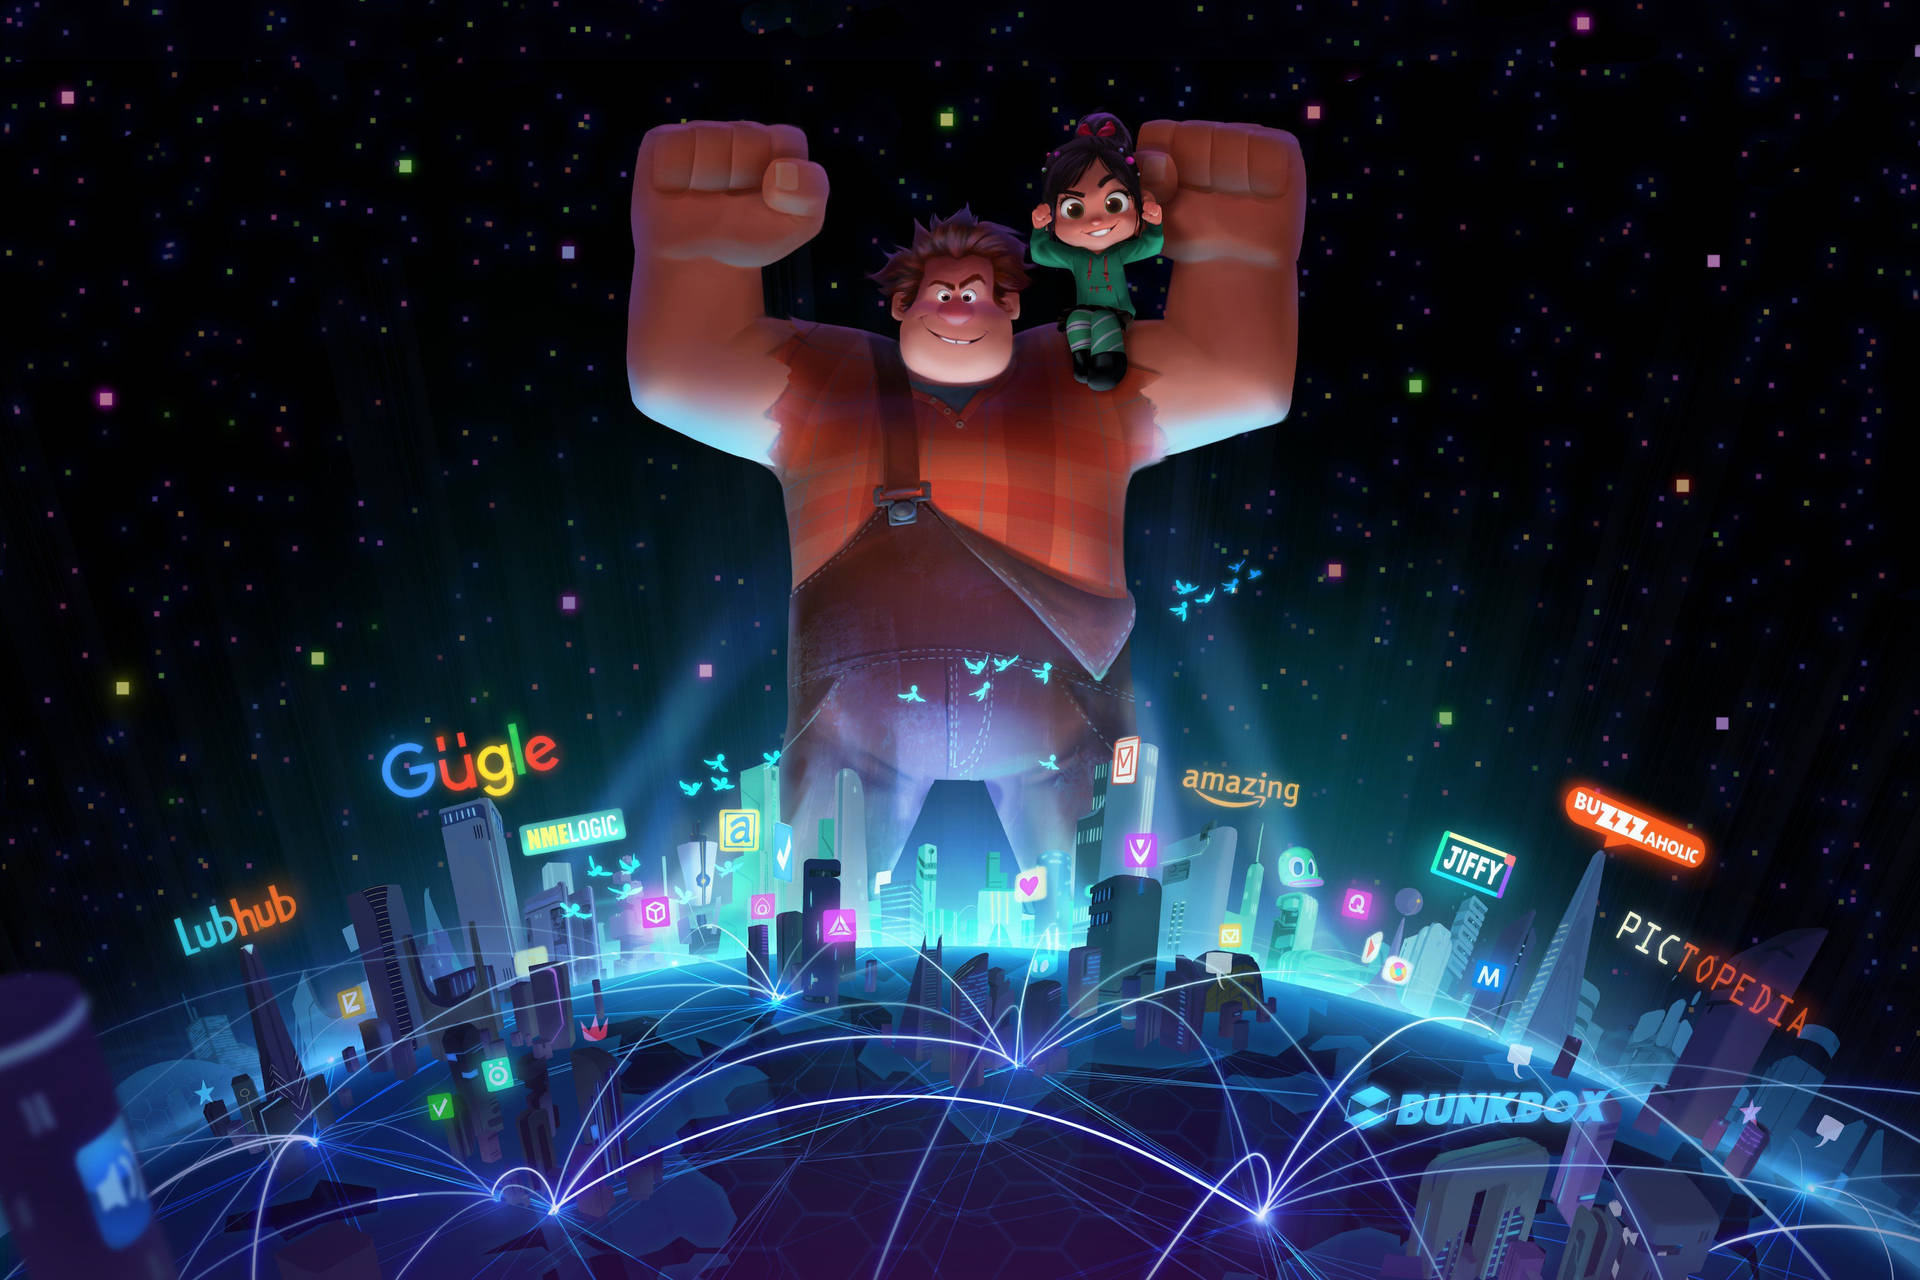 Wreck-it Ralph Pictures Wallpaper